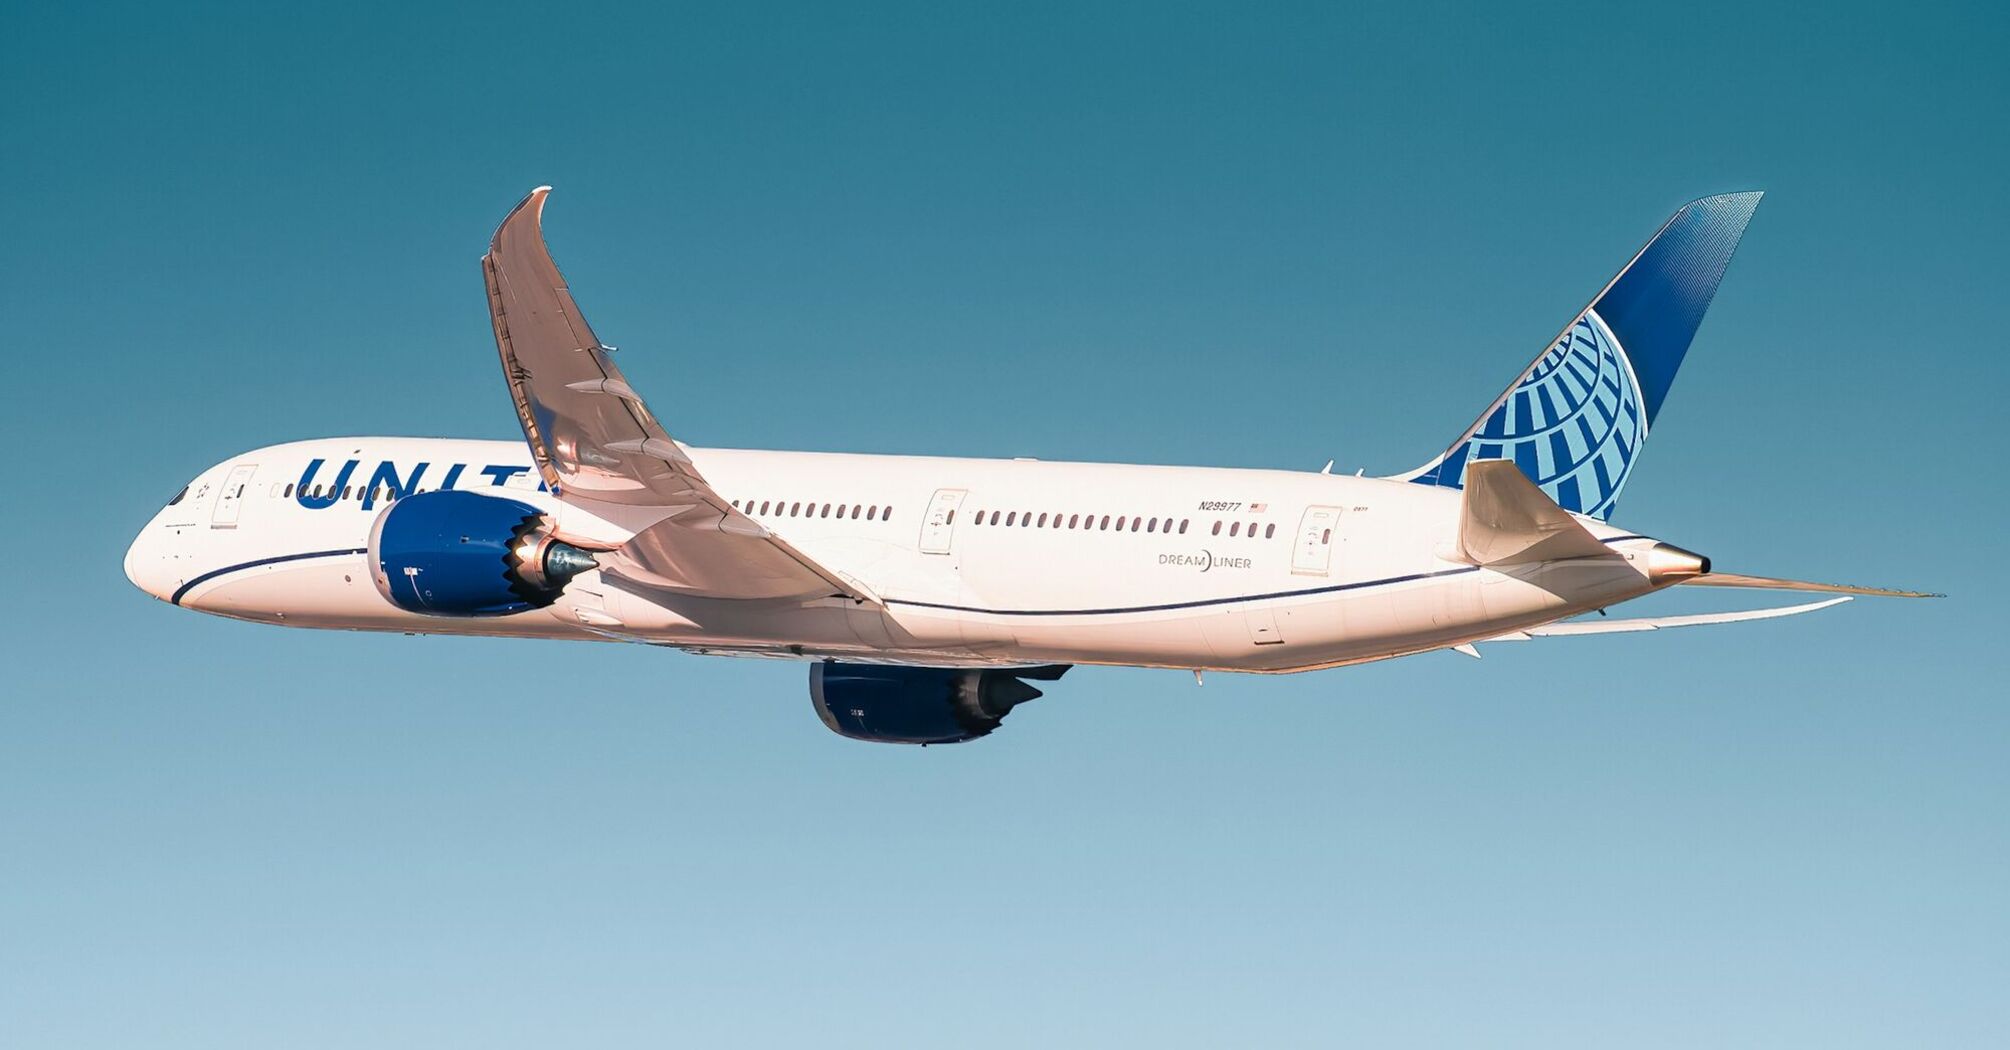 United Airlines Boeing in flight against a clear blue sky